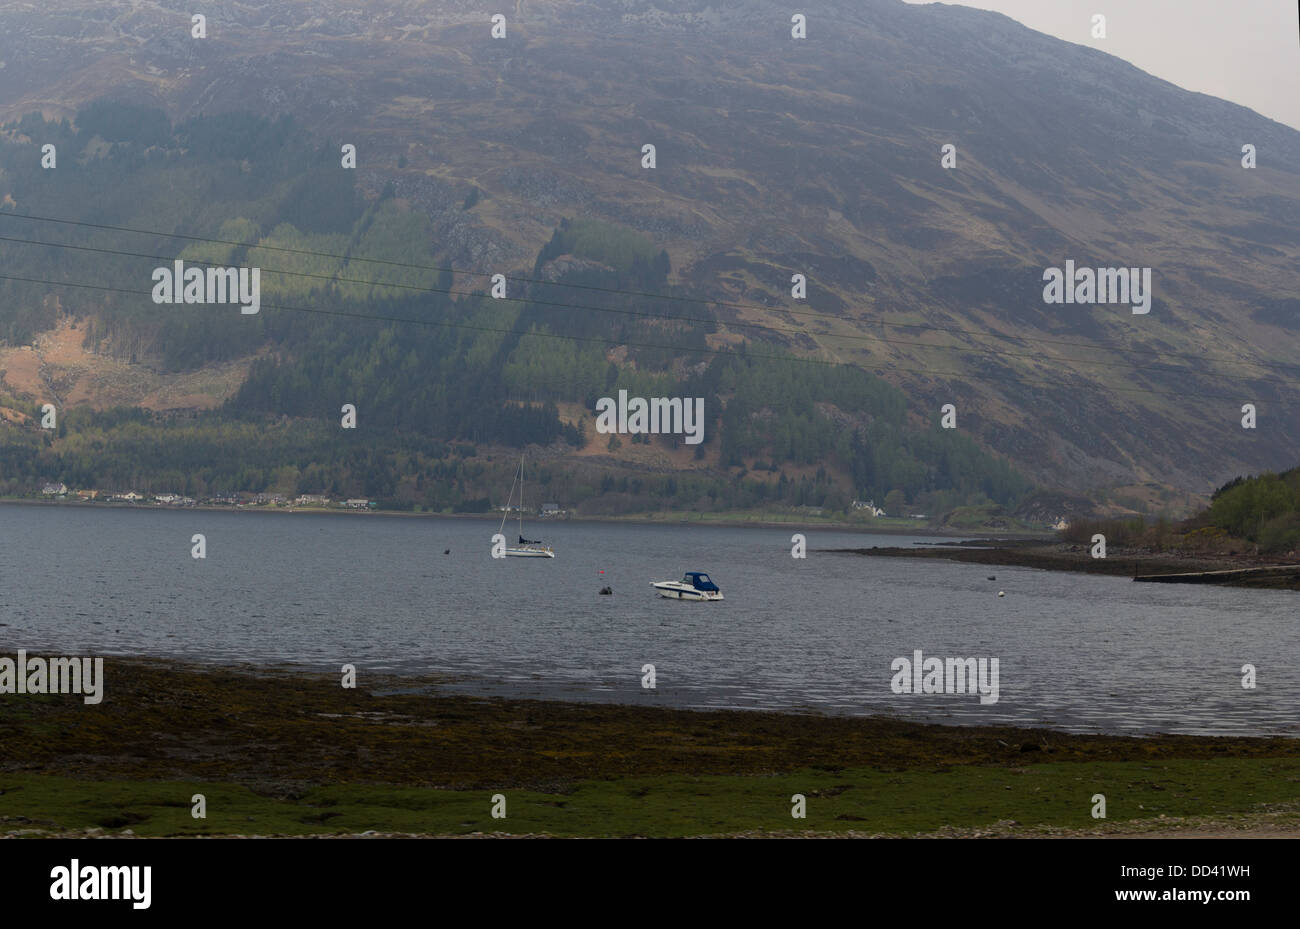 Enjoying with a boat and sailboat in a Loch in the Scottish Highlands. Shore of the lake and hills in background visible. Stock Photo